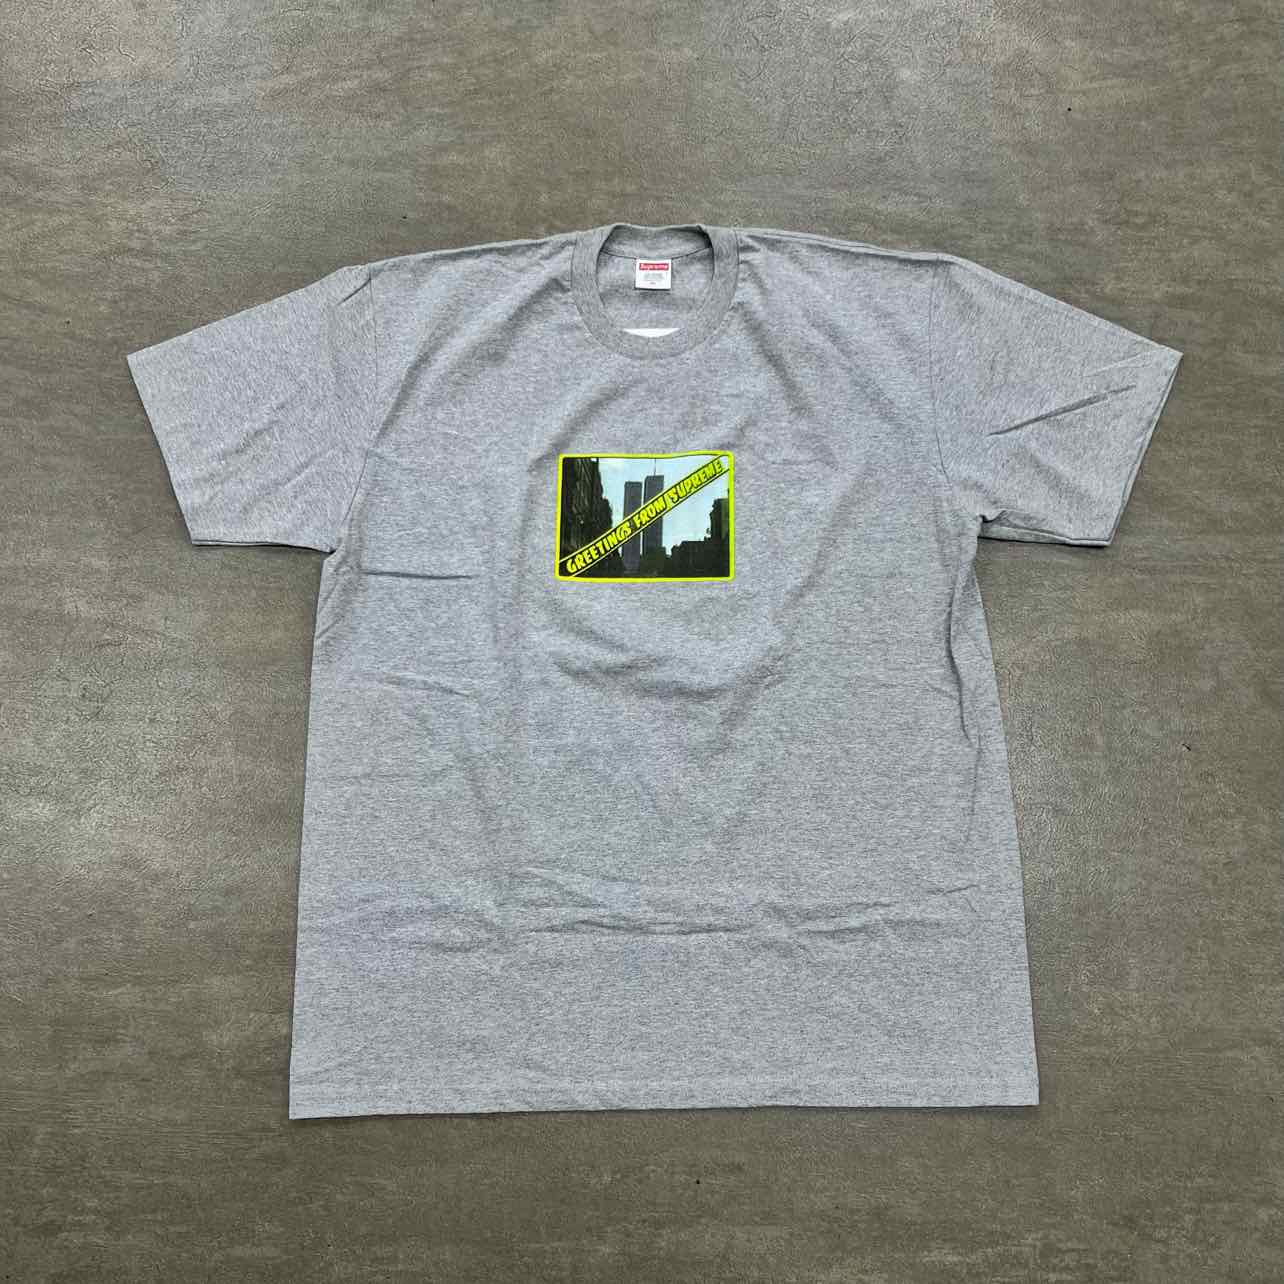 Supreme T-Shirt "GREETINGS FROM SUPREME" Grey New Size XL